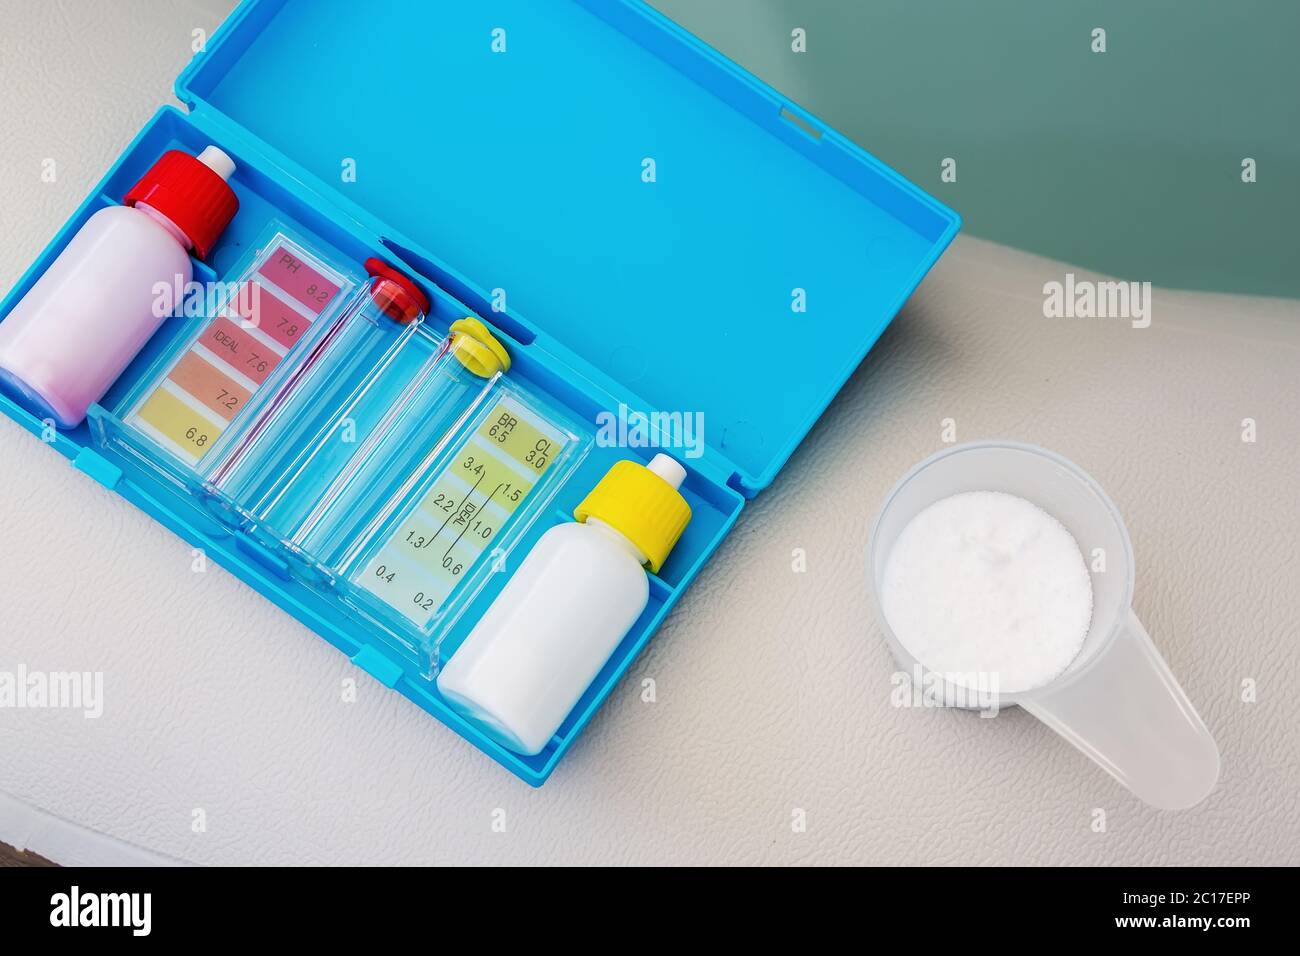 Kit of Ph chlorine and bromide test for water quality test of jacuzzi or pool Stock Photo